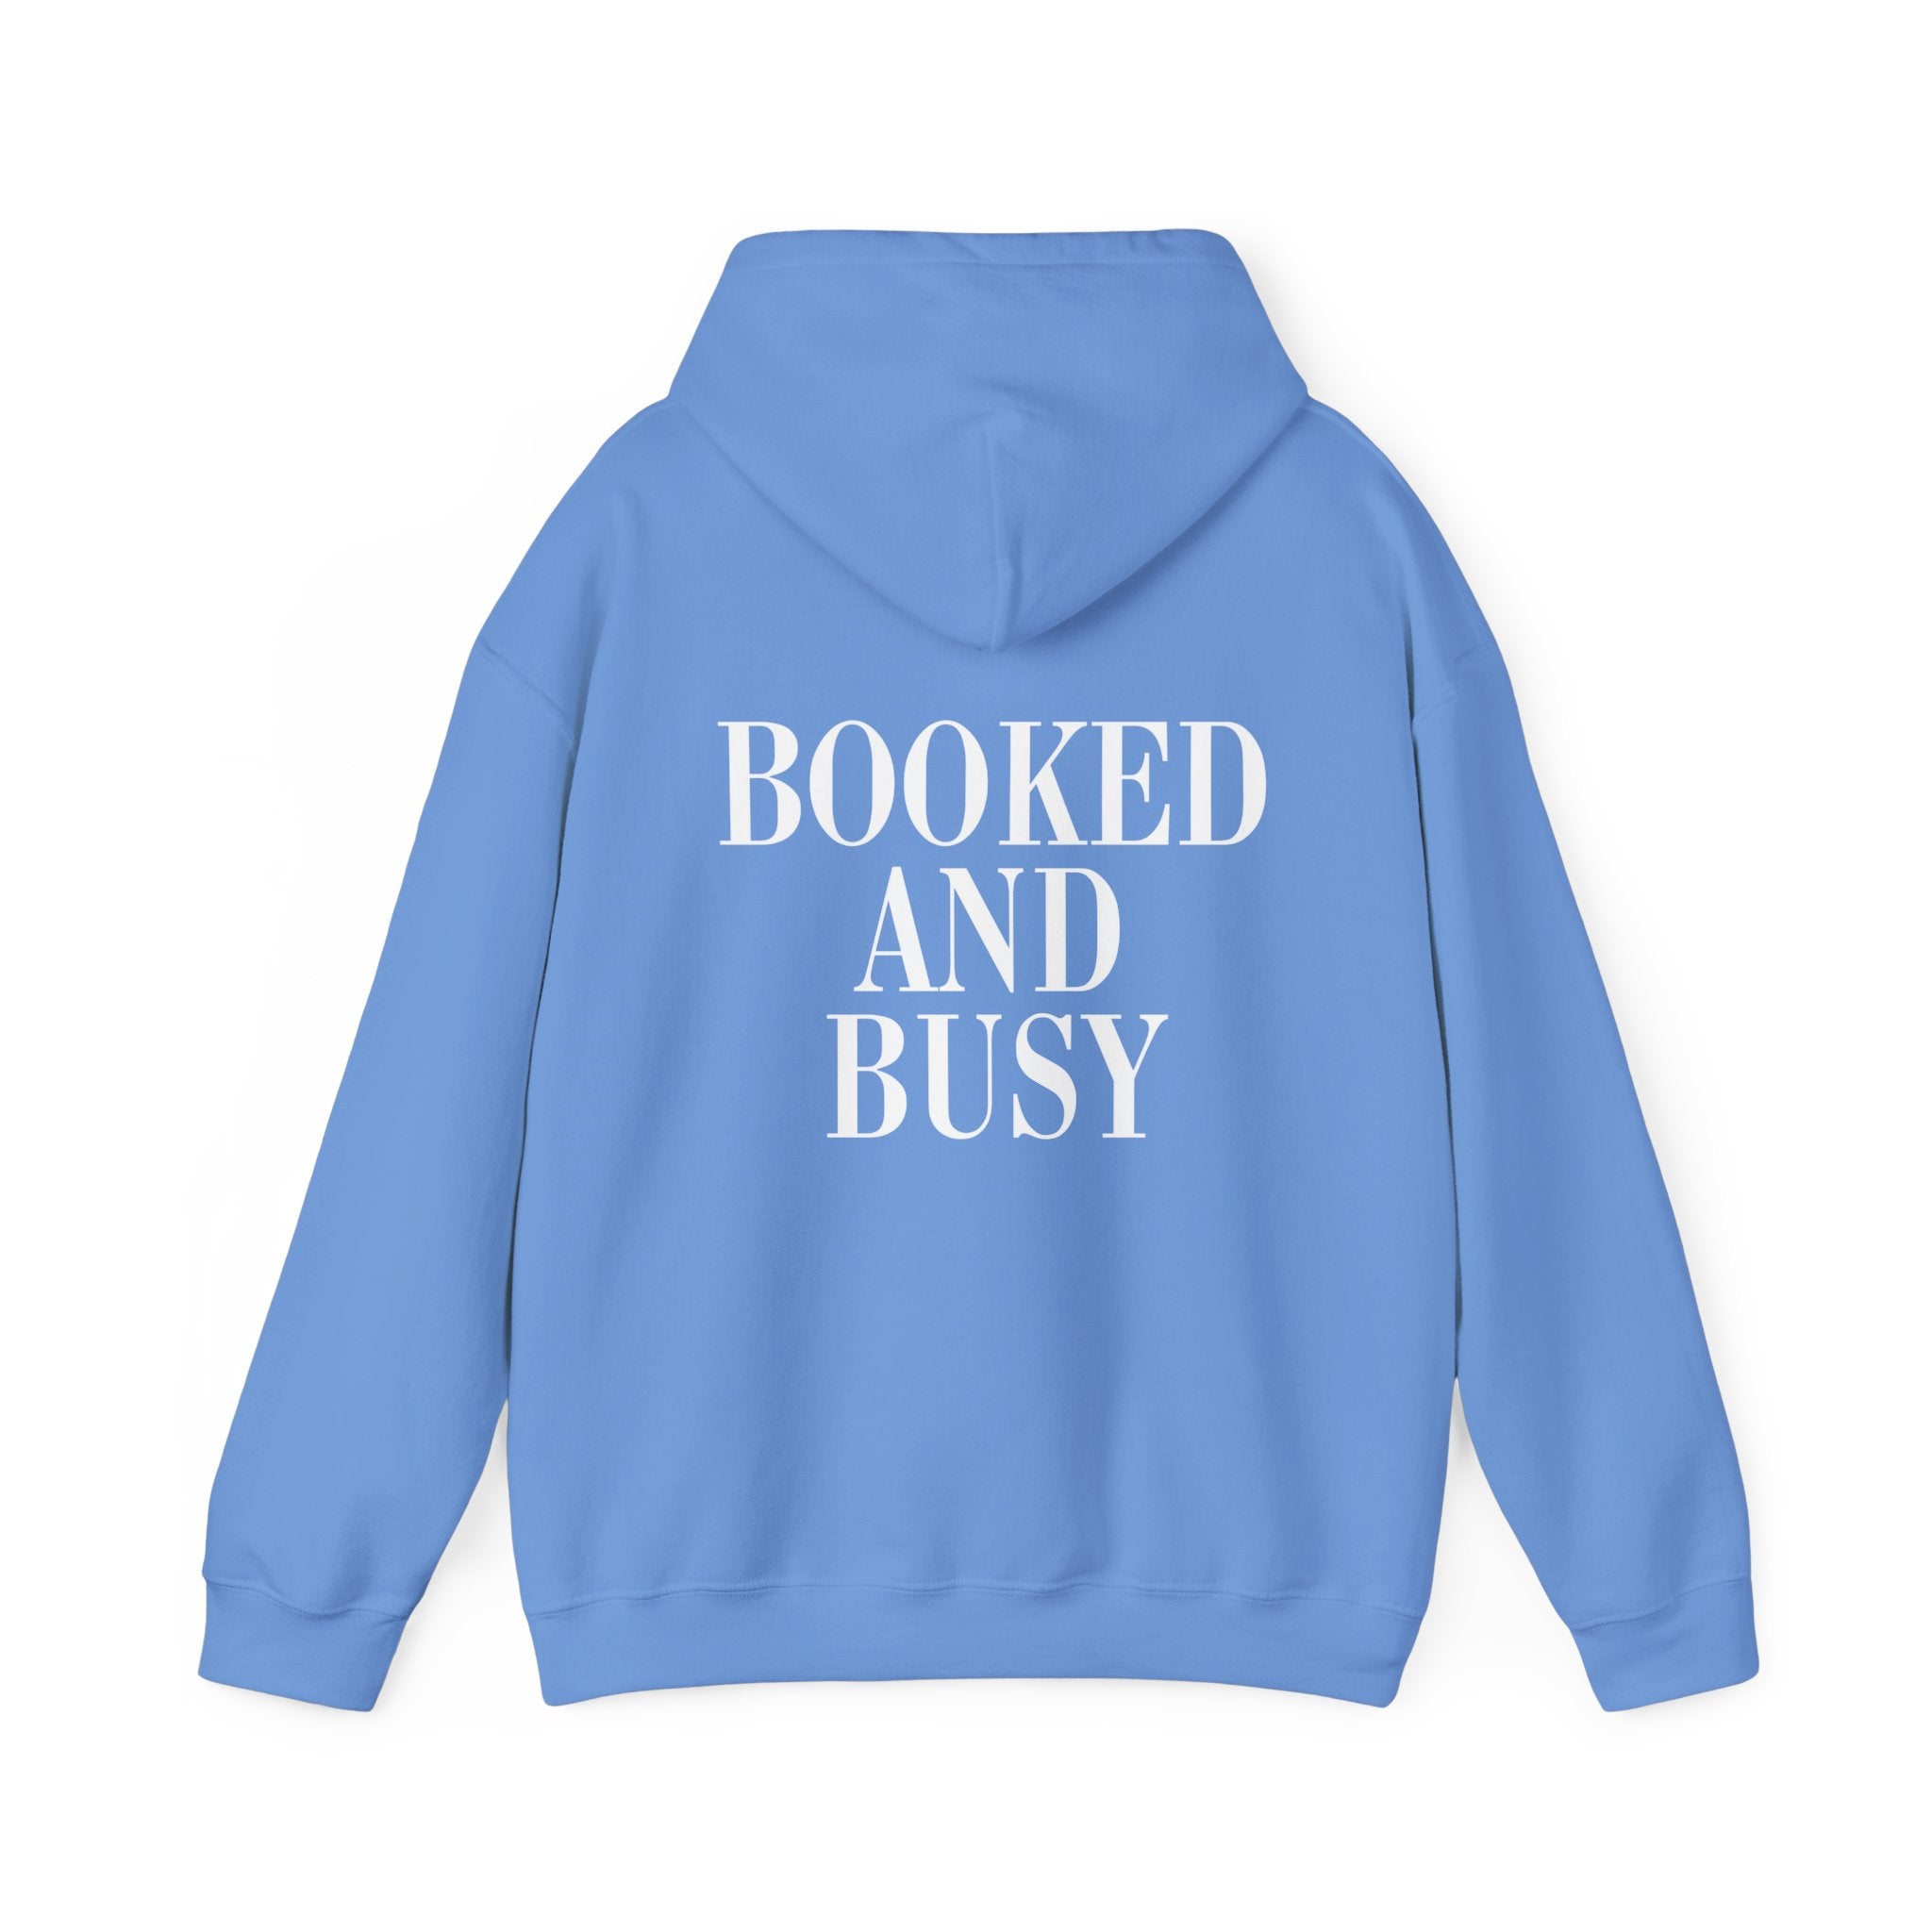 Booked and Busy Hoodie Sweatshirt